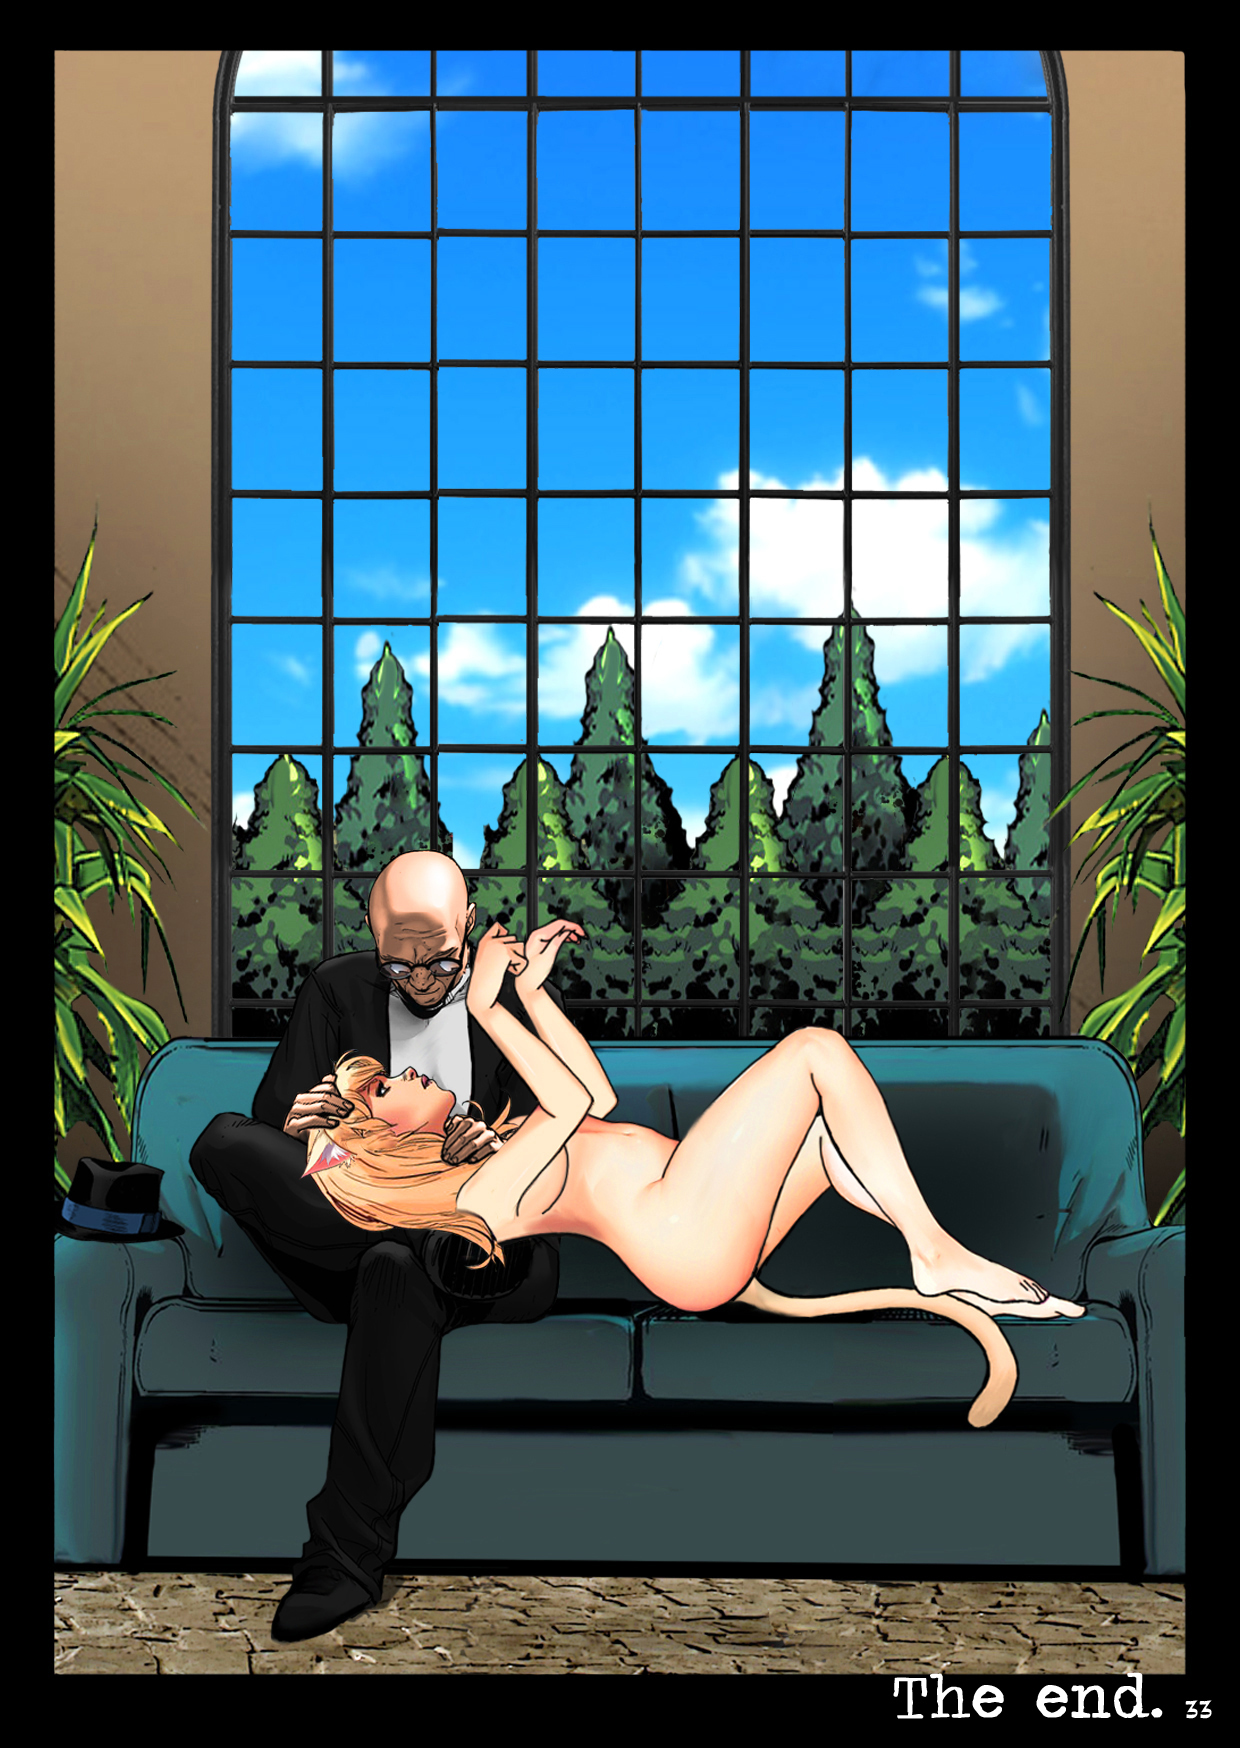 Dr. Vragov relaxes in his villa with his purring catgirl.  A happy ending, if only for Dr. Vragov!